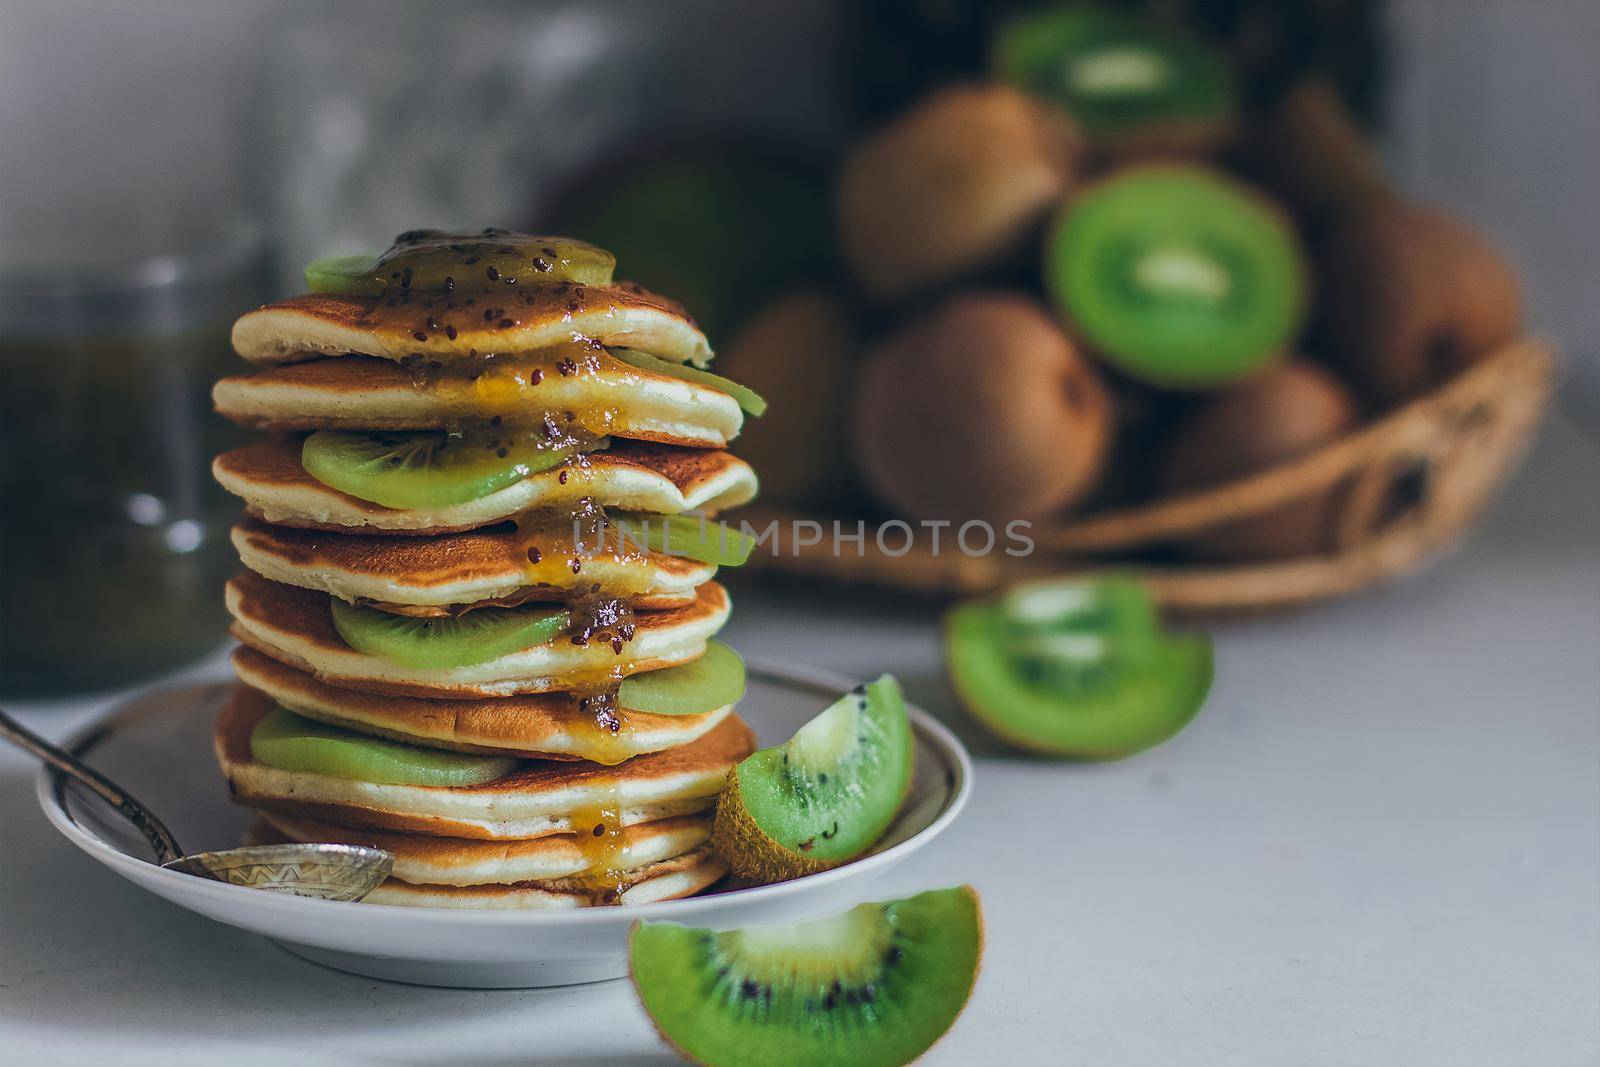 Plate of pancakes dripping with kiwi jam with kiwi pieces. Shrovetide Maslenitsa Butter Week festival meal. Shrove Tuesday. Pancake day